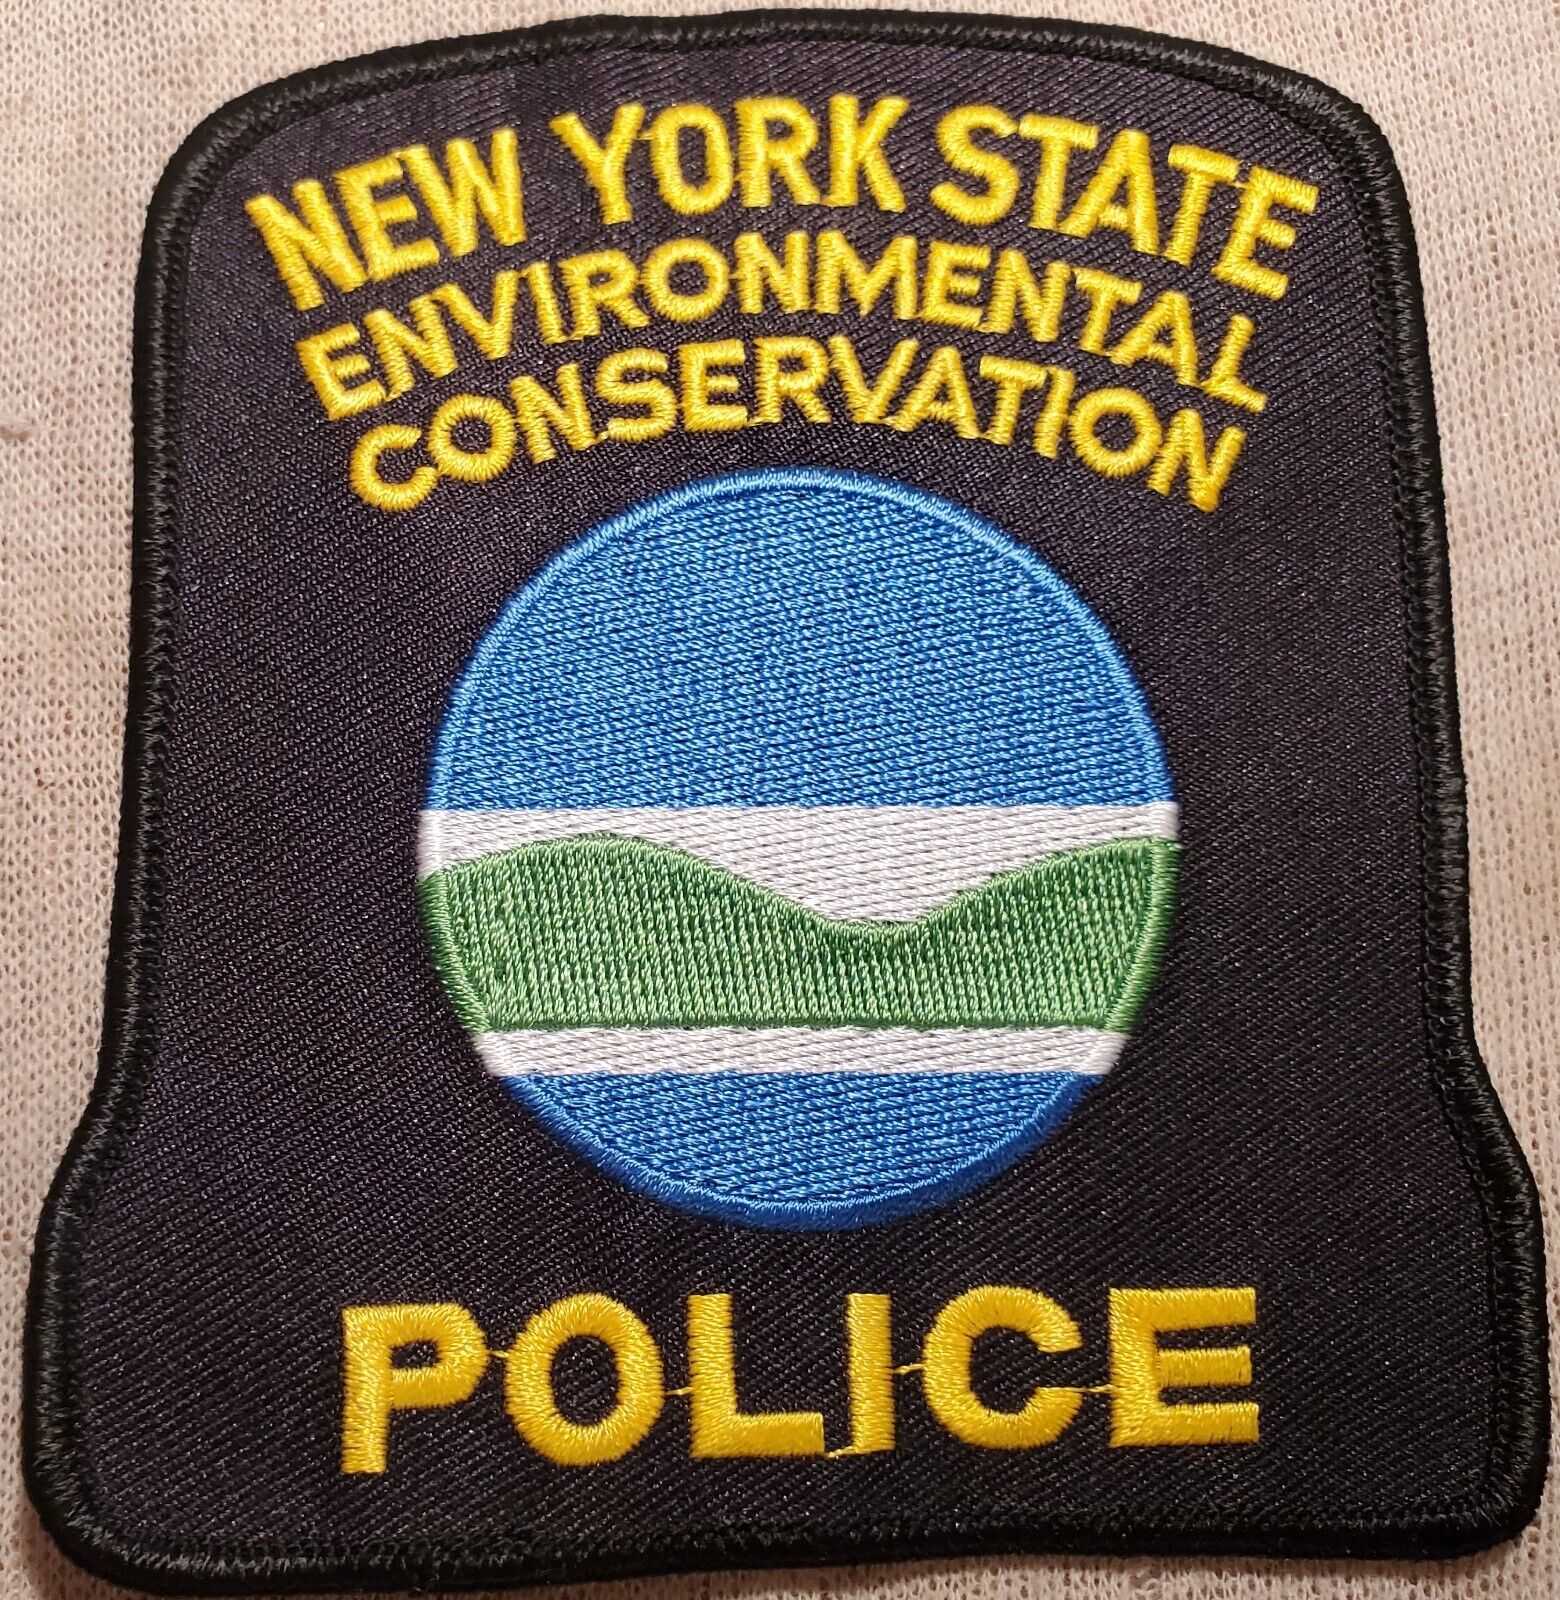 NY New York State Environmental Conservation Police Shoulder Patch